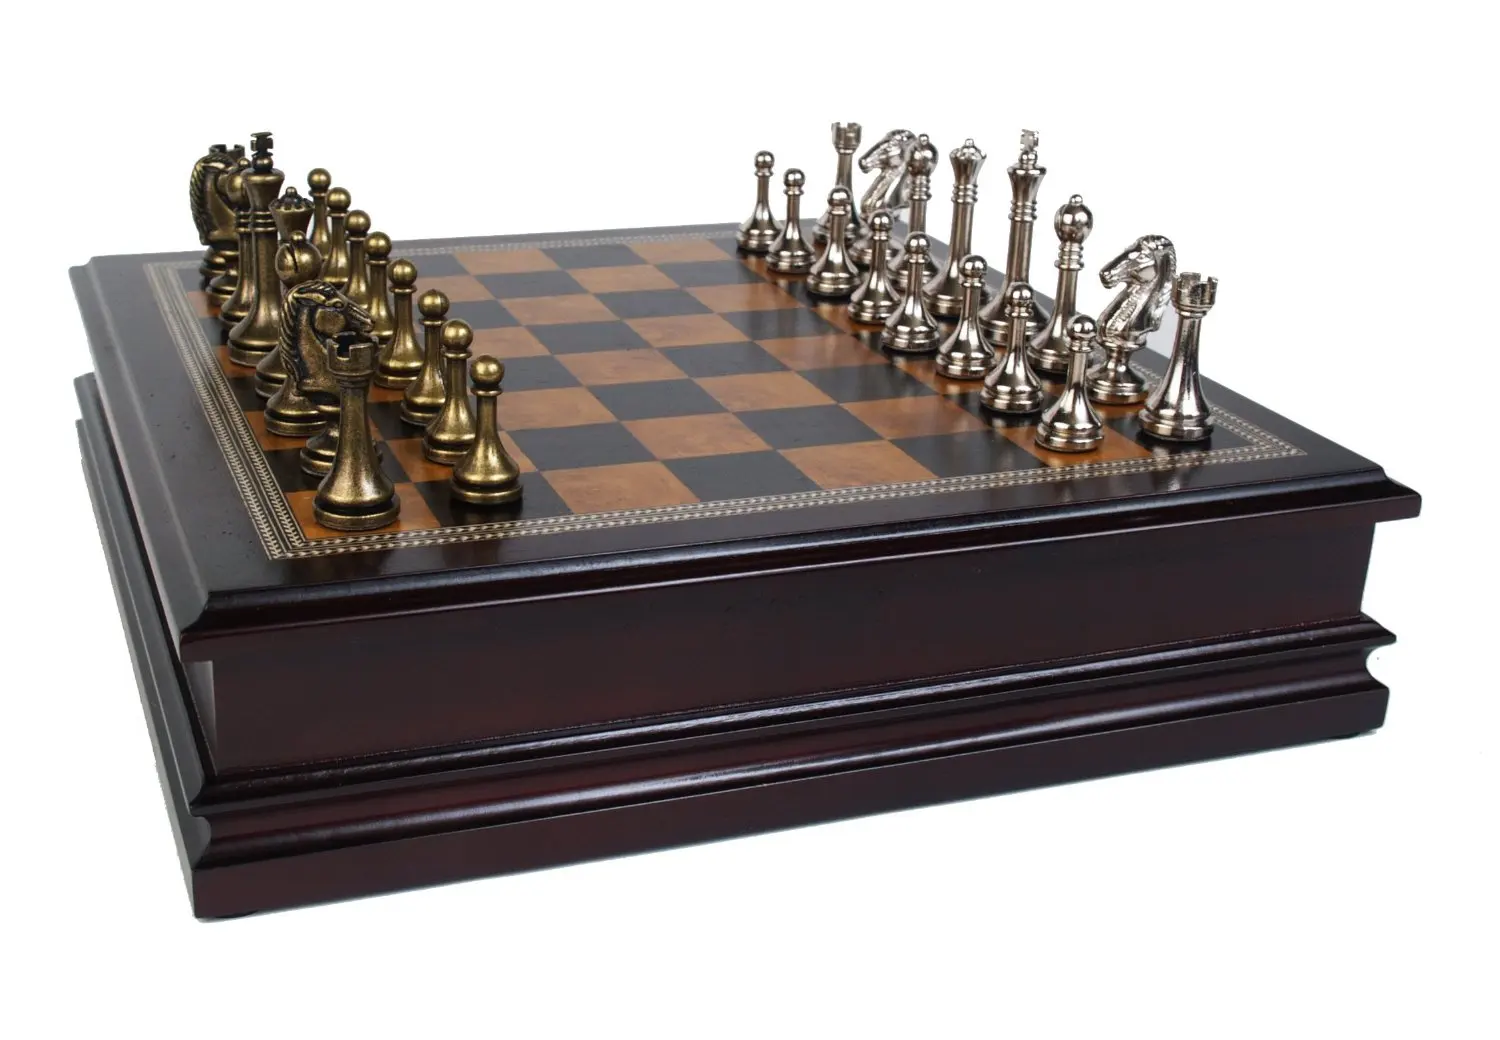 Featured image of post Code Geass Chess Set Amazon The pieces are based on what i could gather from the provided reference image